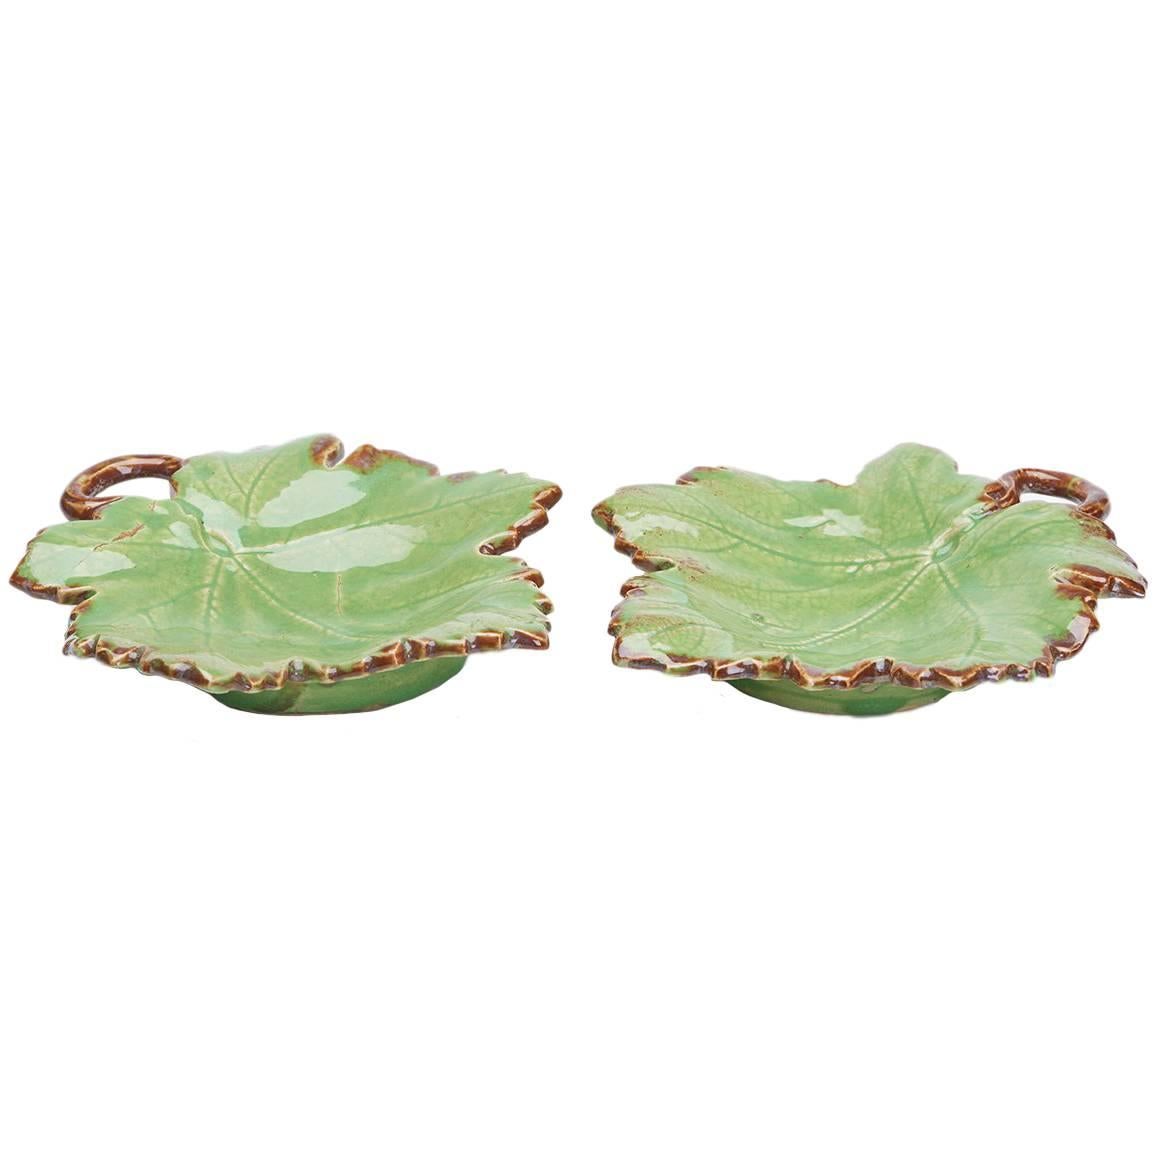 Greber Pair of French Art Pottery Green Leaf Dishes, circa 1899-1933 For Sale